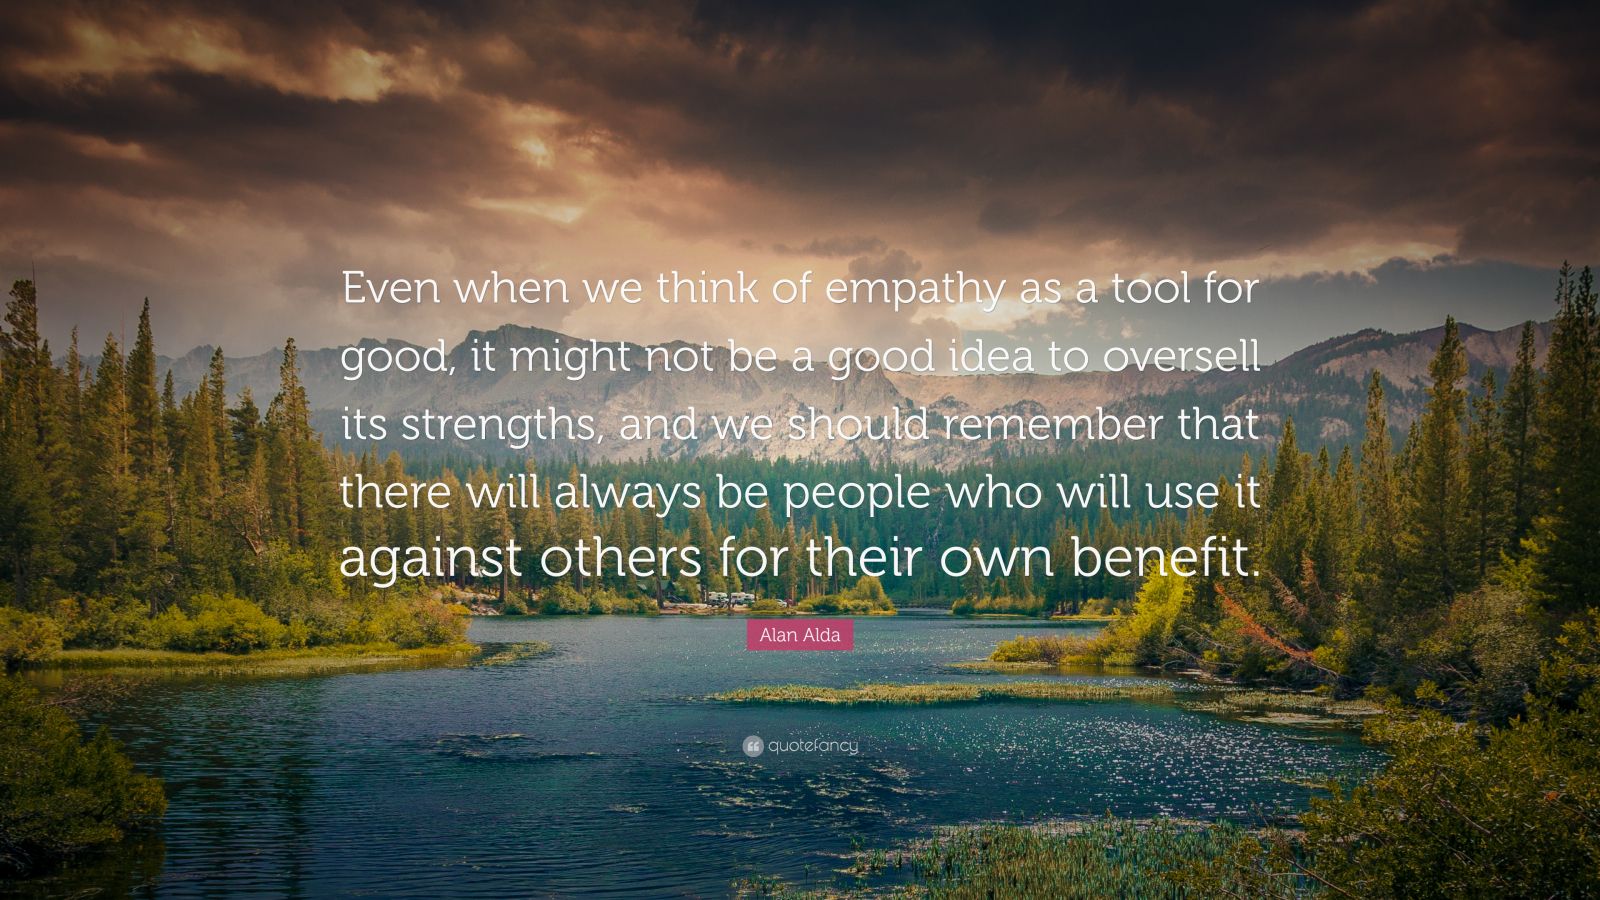 Alan Alda Quote: “Even when we think of empathy as a tool for good, it ...